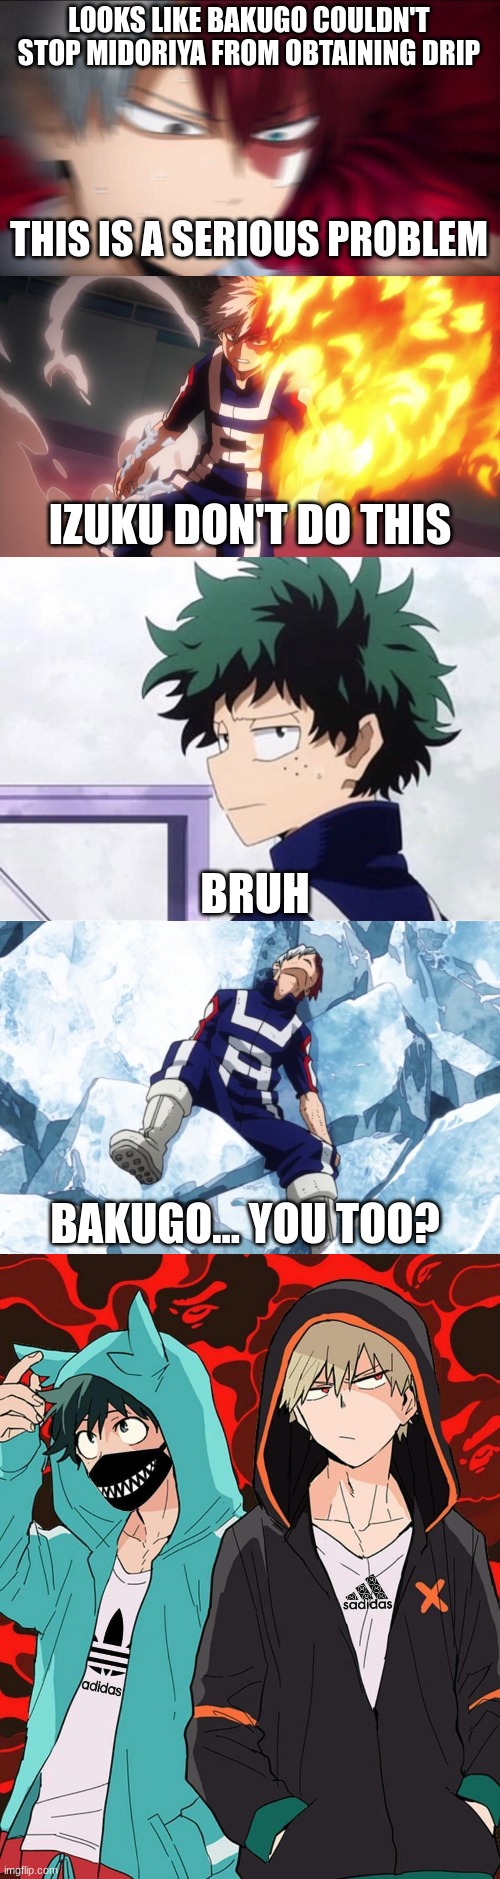 Deku wants drip....... PART 3 | LOOKS LIKE BAKUGO COULDN'T STOP MIDORIYA FROM OBTAINING DRIP; THIS IS A SERIOUS PROBLEM; IZUKU DON'T DO THIS; BRUH; BAKUGO... YOU TOO? | image tagged in todoroki can't handle the drip | made w/ Imgflip meme maker